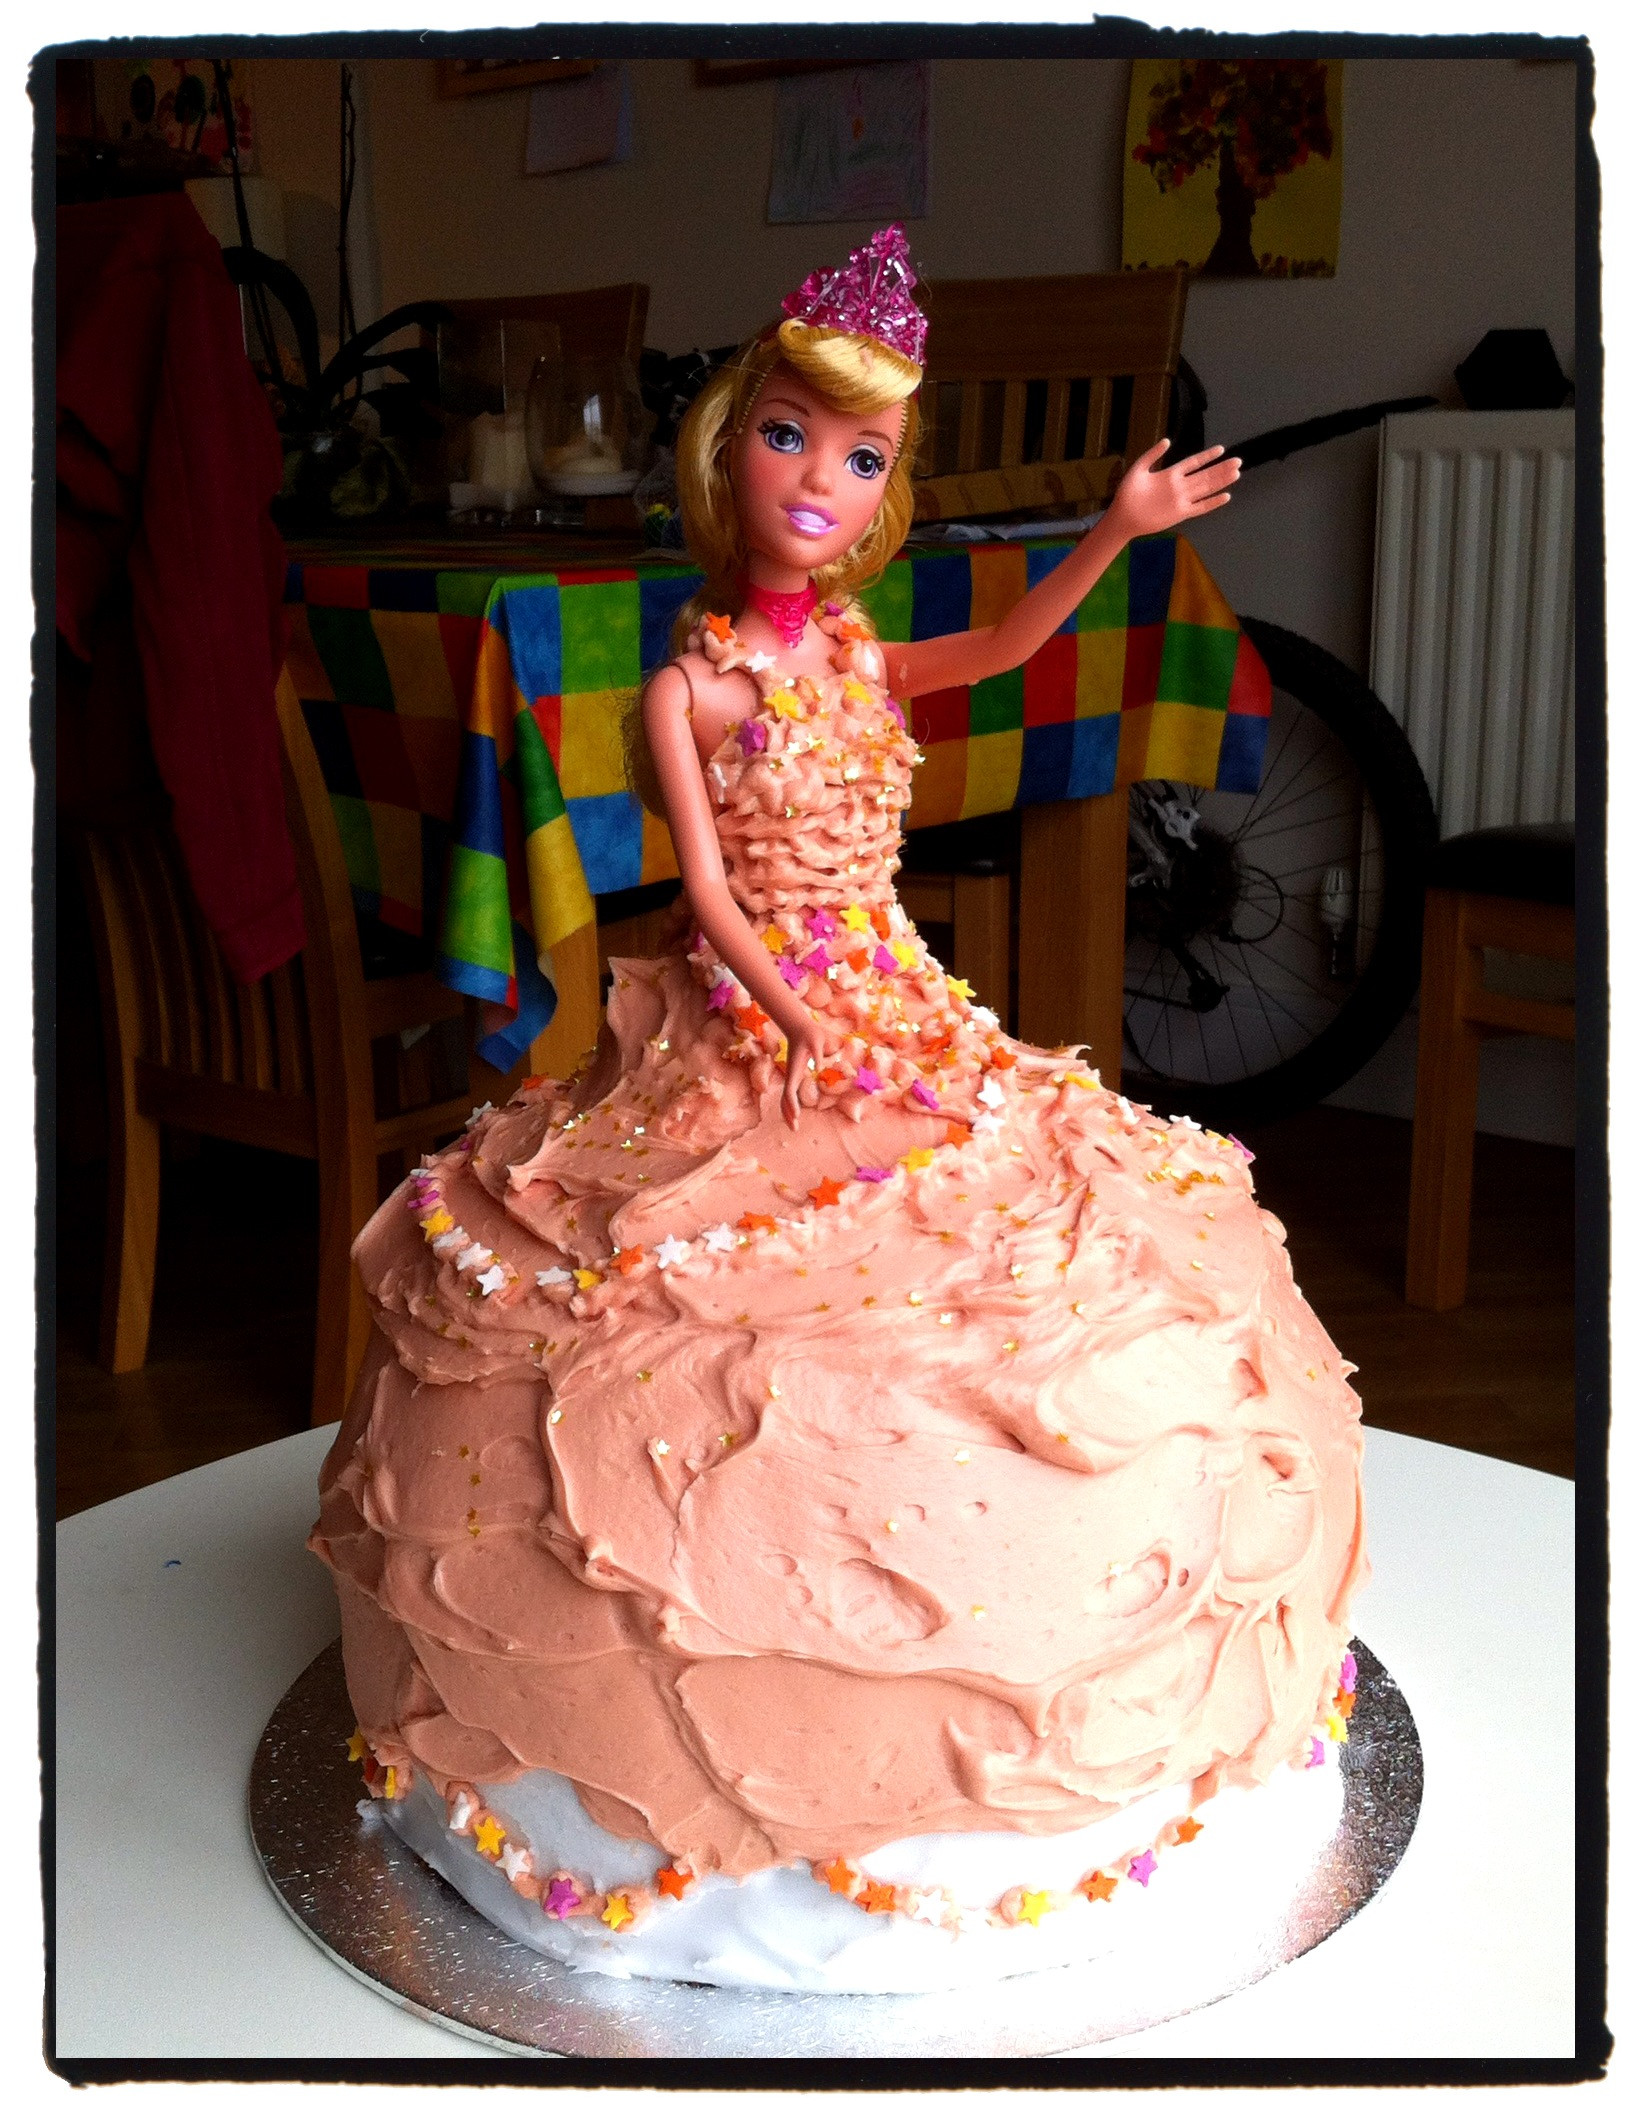 Birthday Cake Recipe From Scratch
 How to make a Princess Birthday Cake from scratch